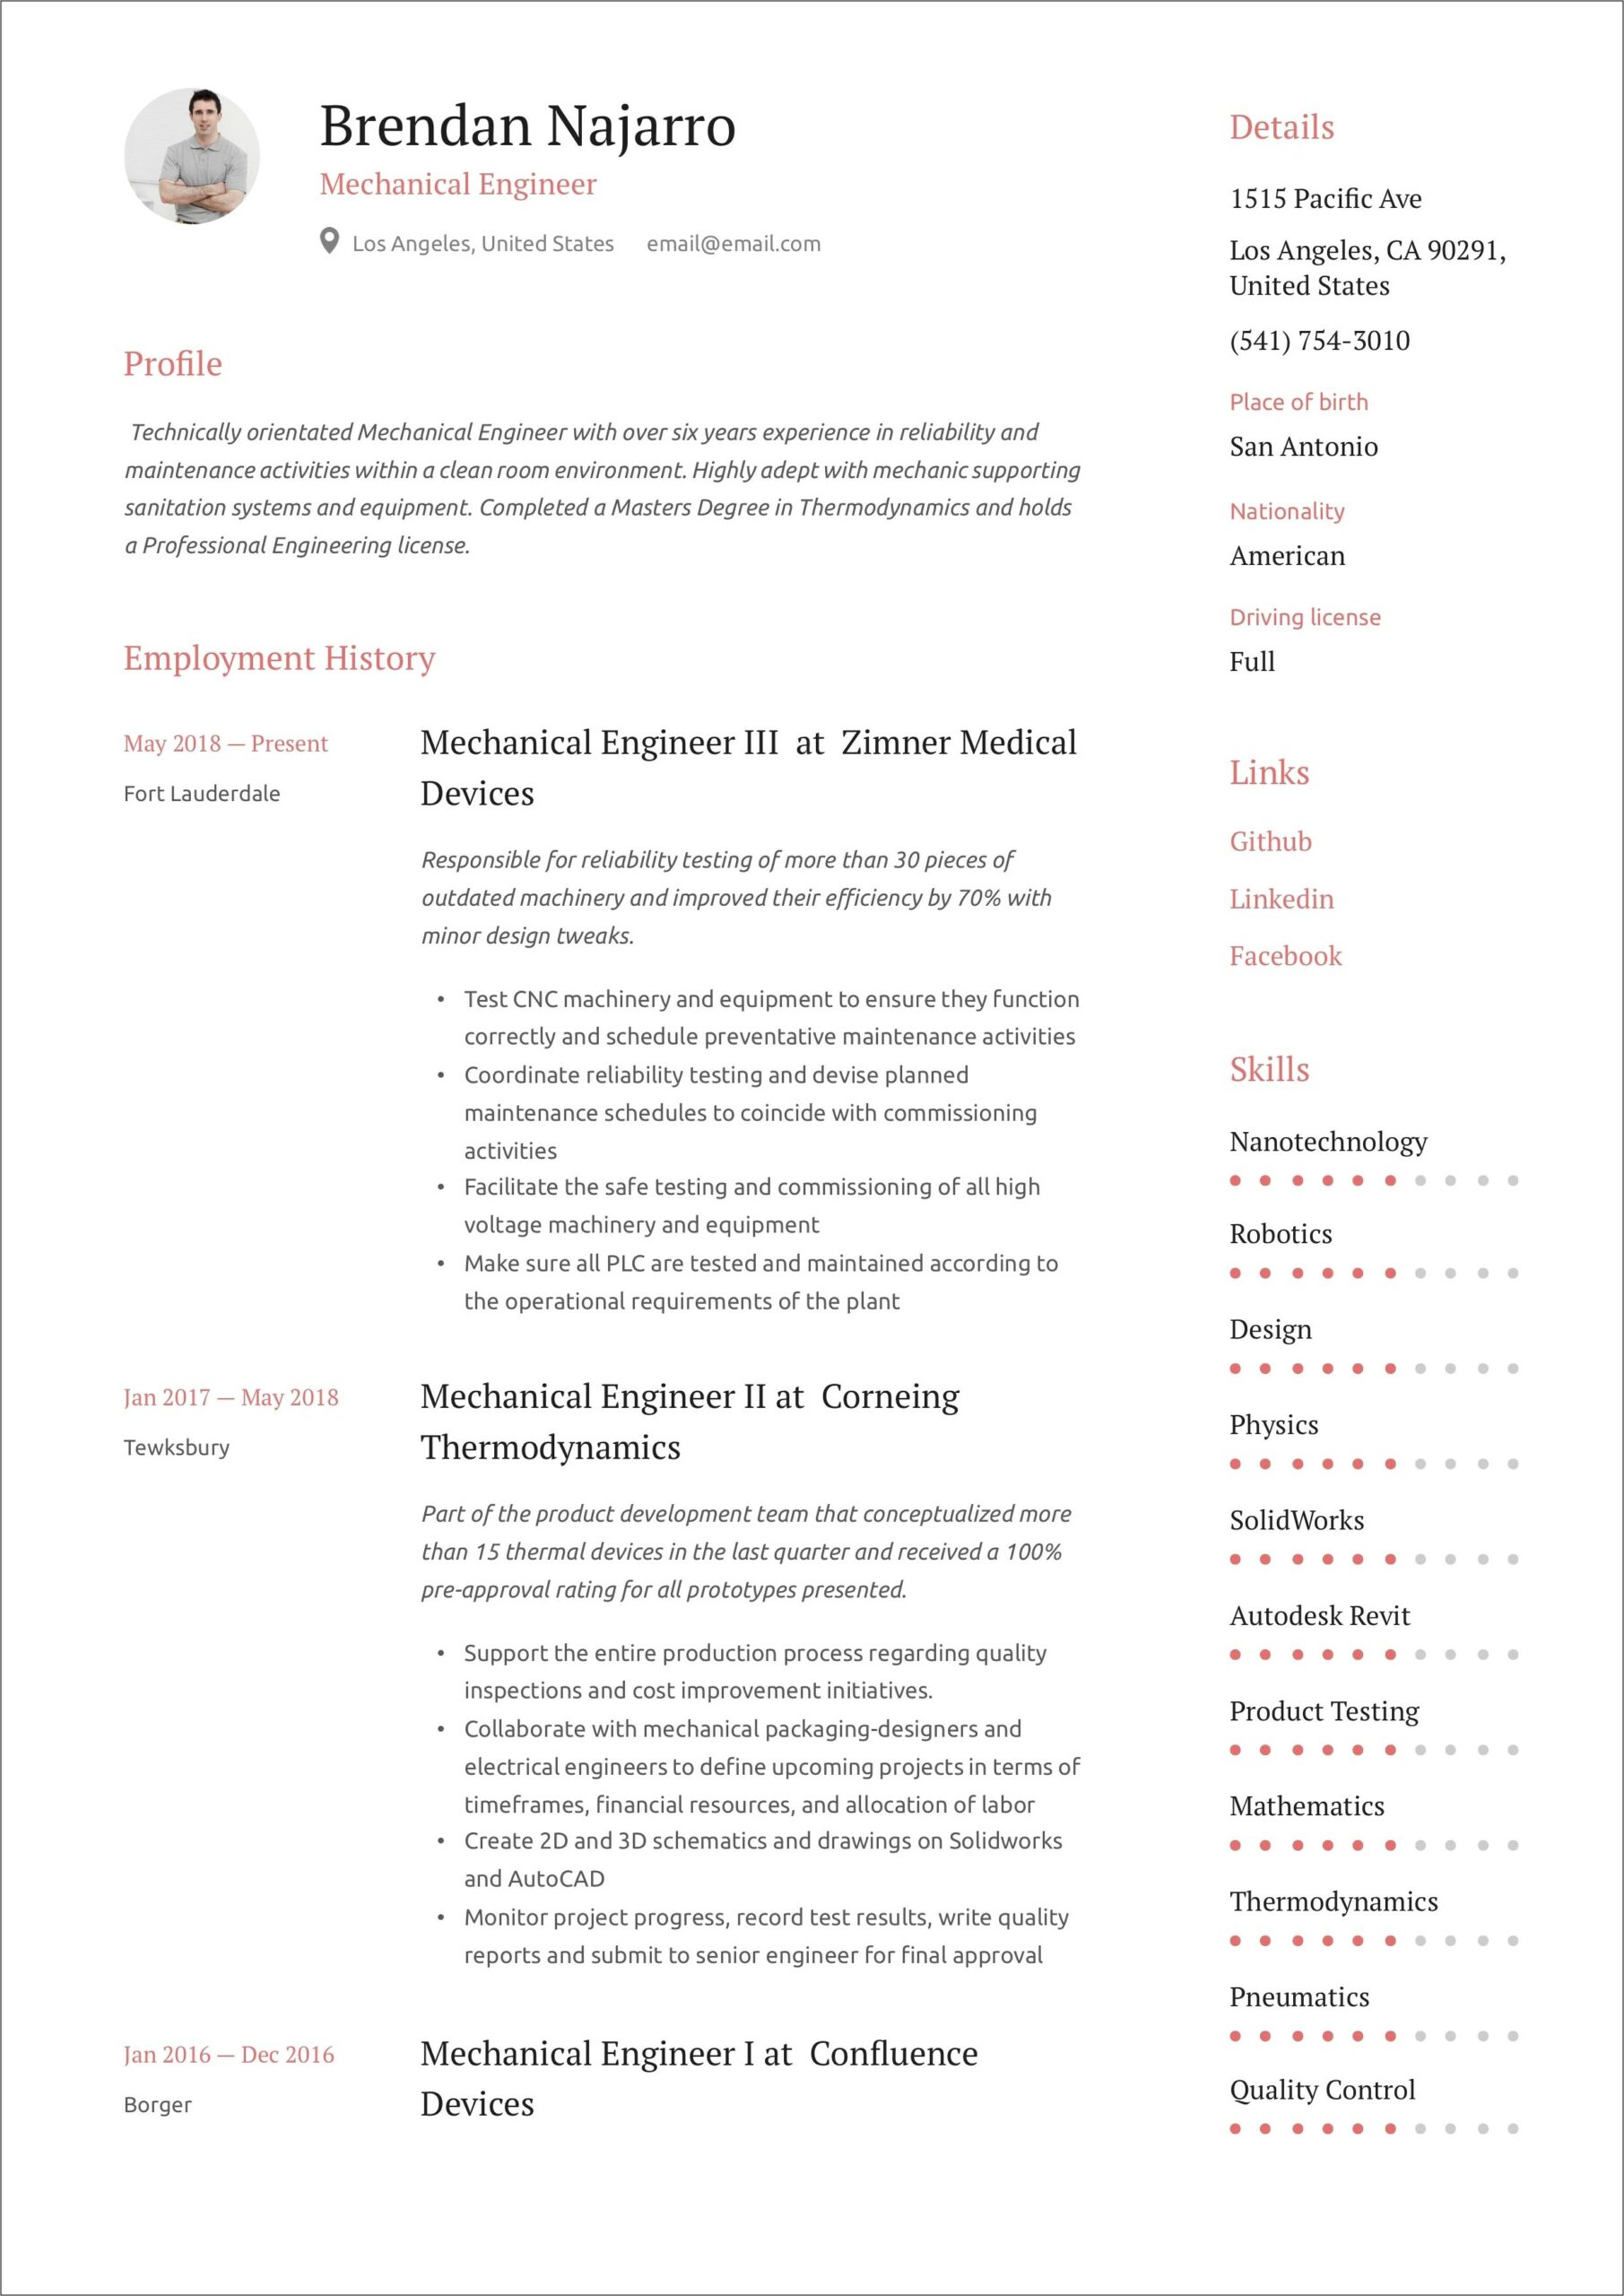 Resume Pitch About Yourself Examples